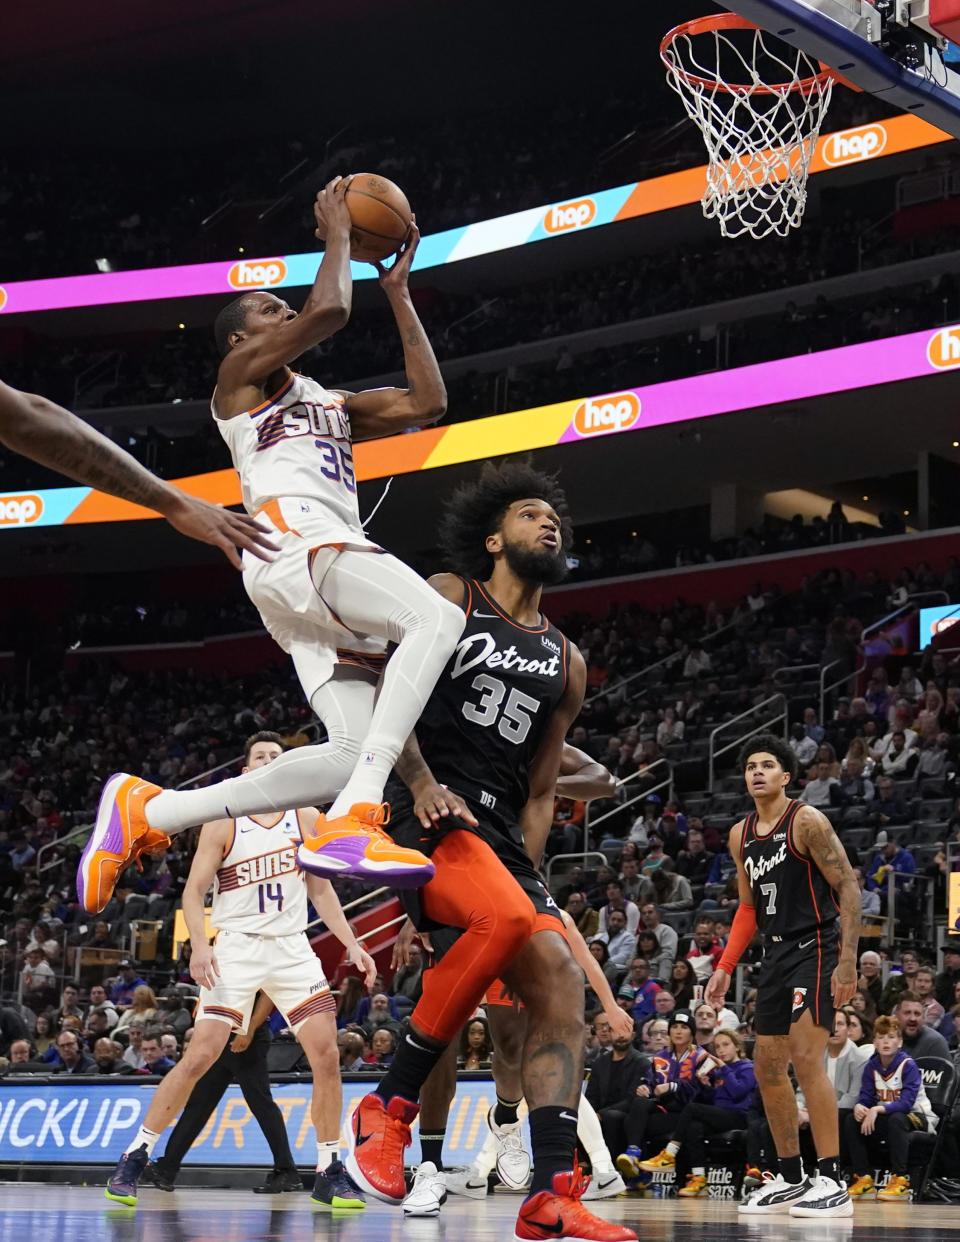 Phoenix Suns forward Kevin Durant (35) attempts a basket as Detroit Pistons forward Marvin Bagley III (35) defends during the second half of an NBA basketball game, Sunday, Nov. 5, 2023, in Detroit. (AP Photo/Carlos Osorio)